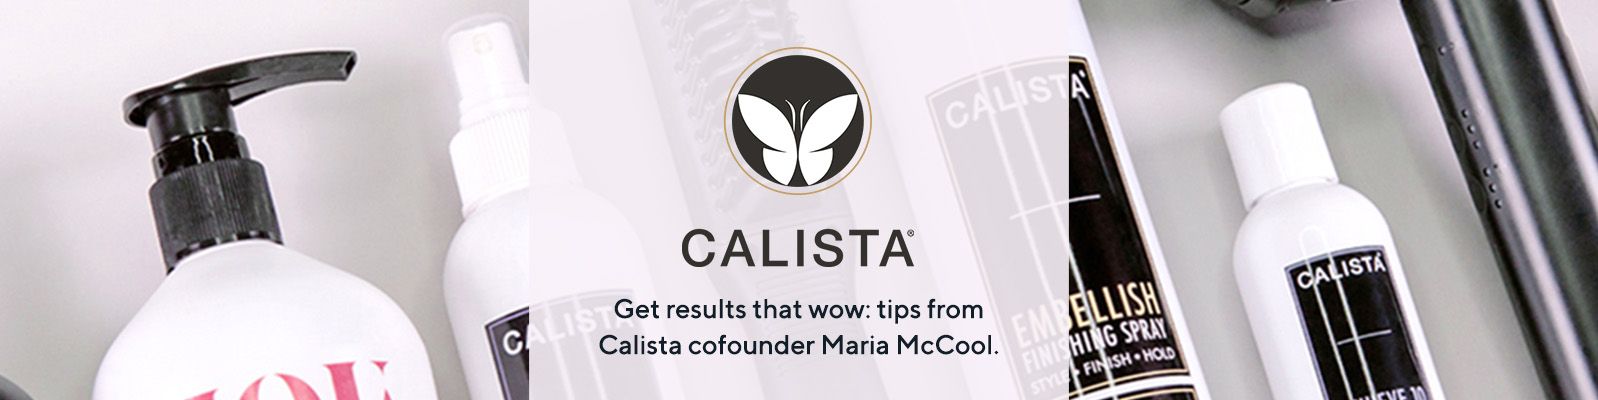 Calista™ Get results that wow: tips from Calista cofounder Maria McCool